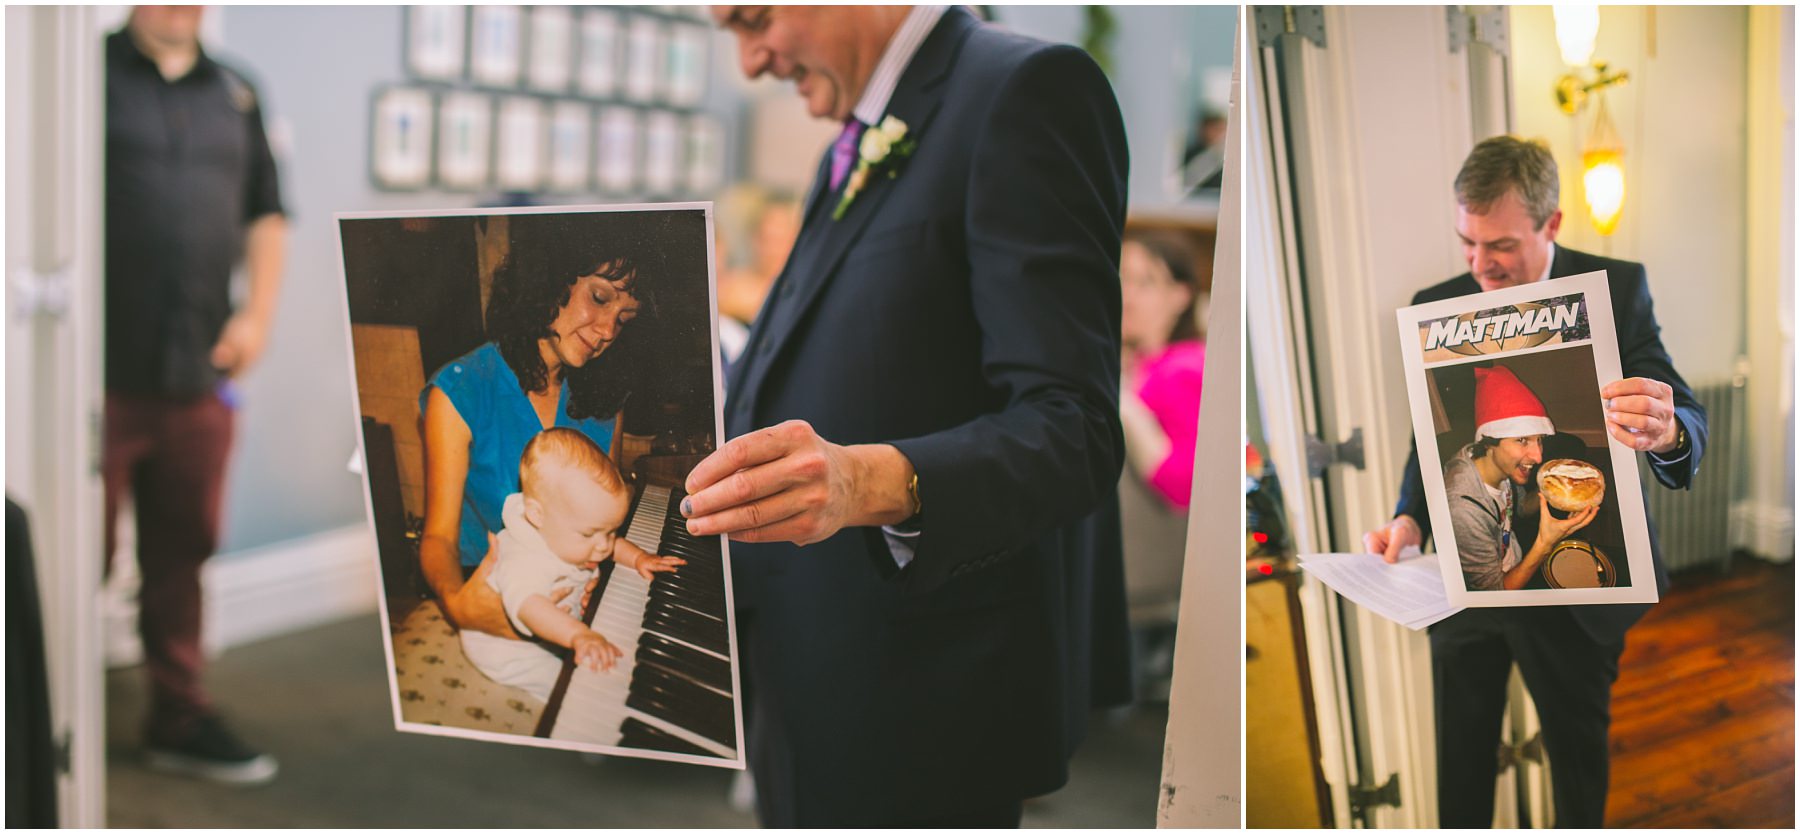 Father of the bride showing off embarrassing photos during his speech